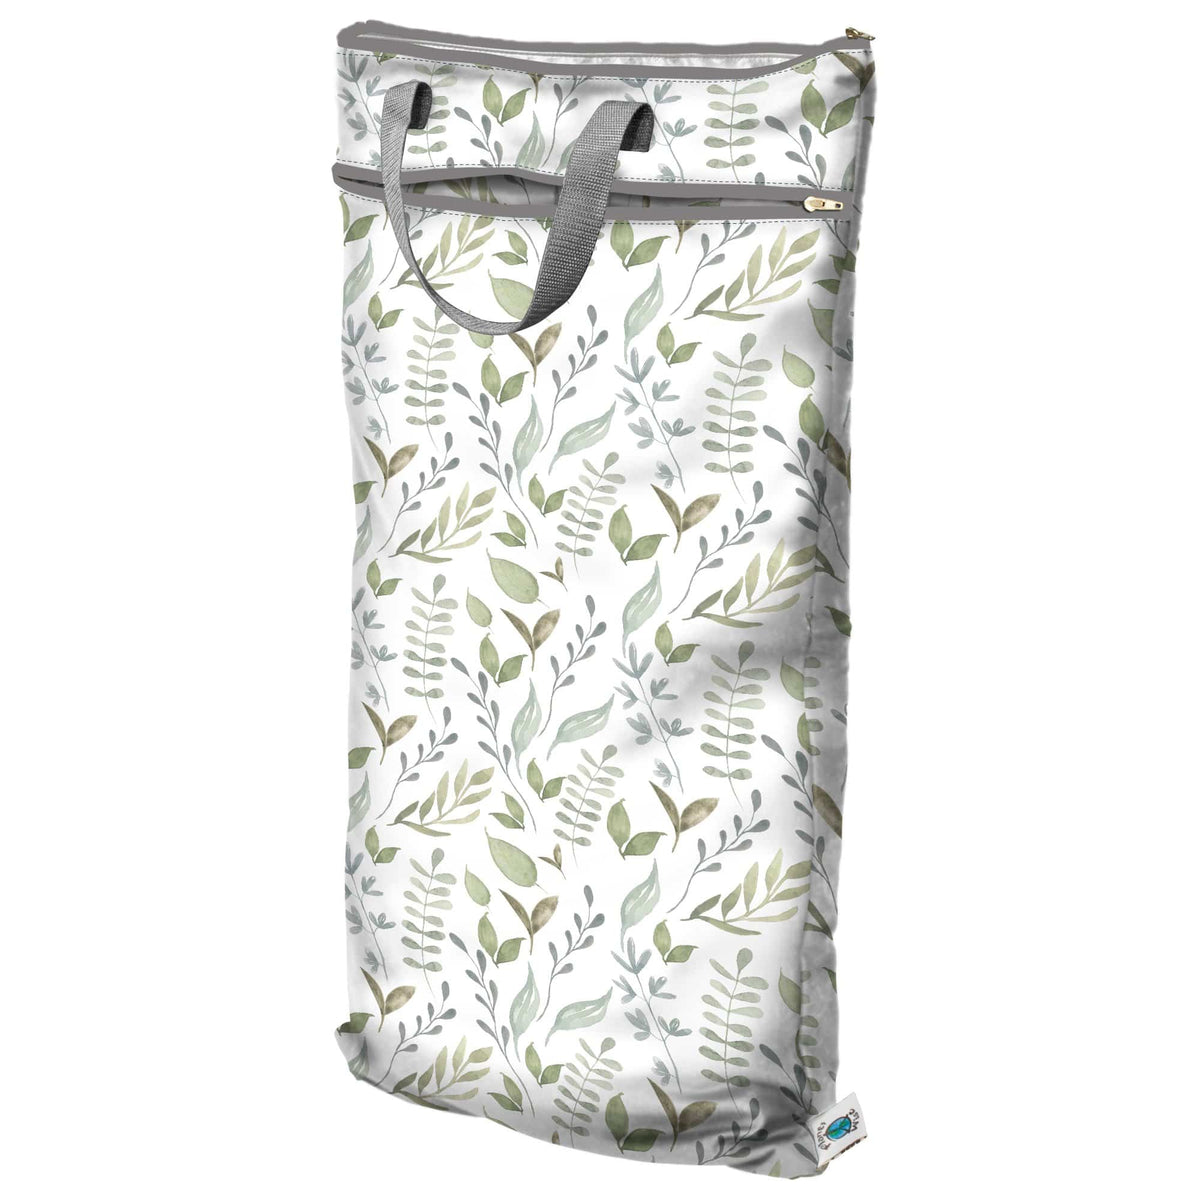 Planet Wise Hanging Wet/Dry Bag Beleaf in Yourself